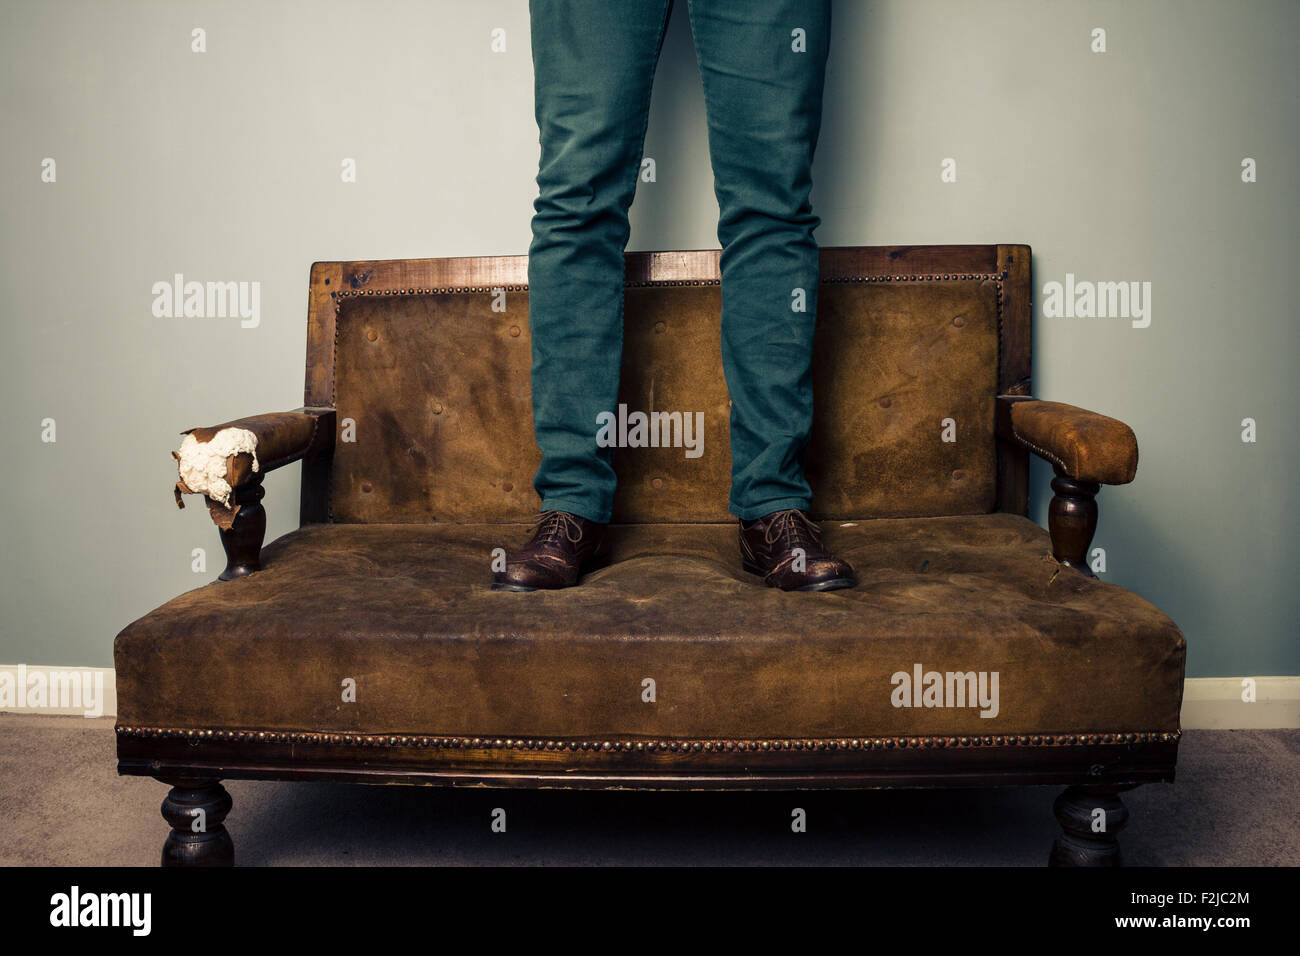 Legs of man standing on a sofa Stock Photo